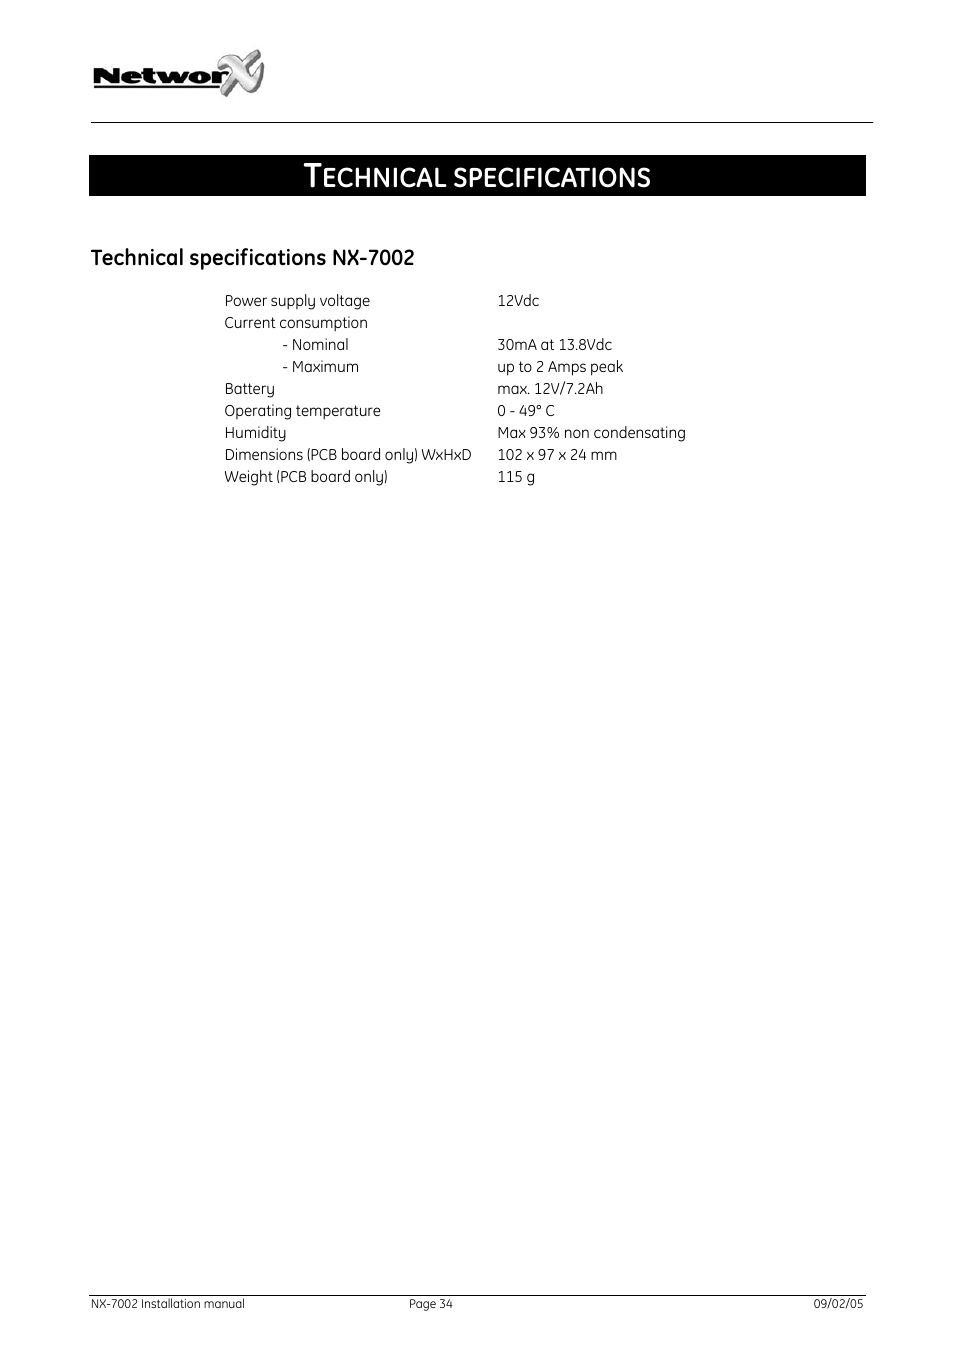 Technical specifications, Technical specifications nx-7002, Echnical specifications | Nx-7002 | GE NetworX NX-7002 User Manual | Page 34 / 39